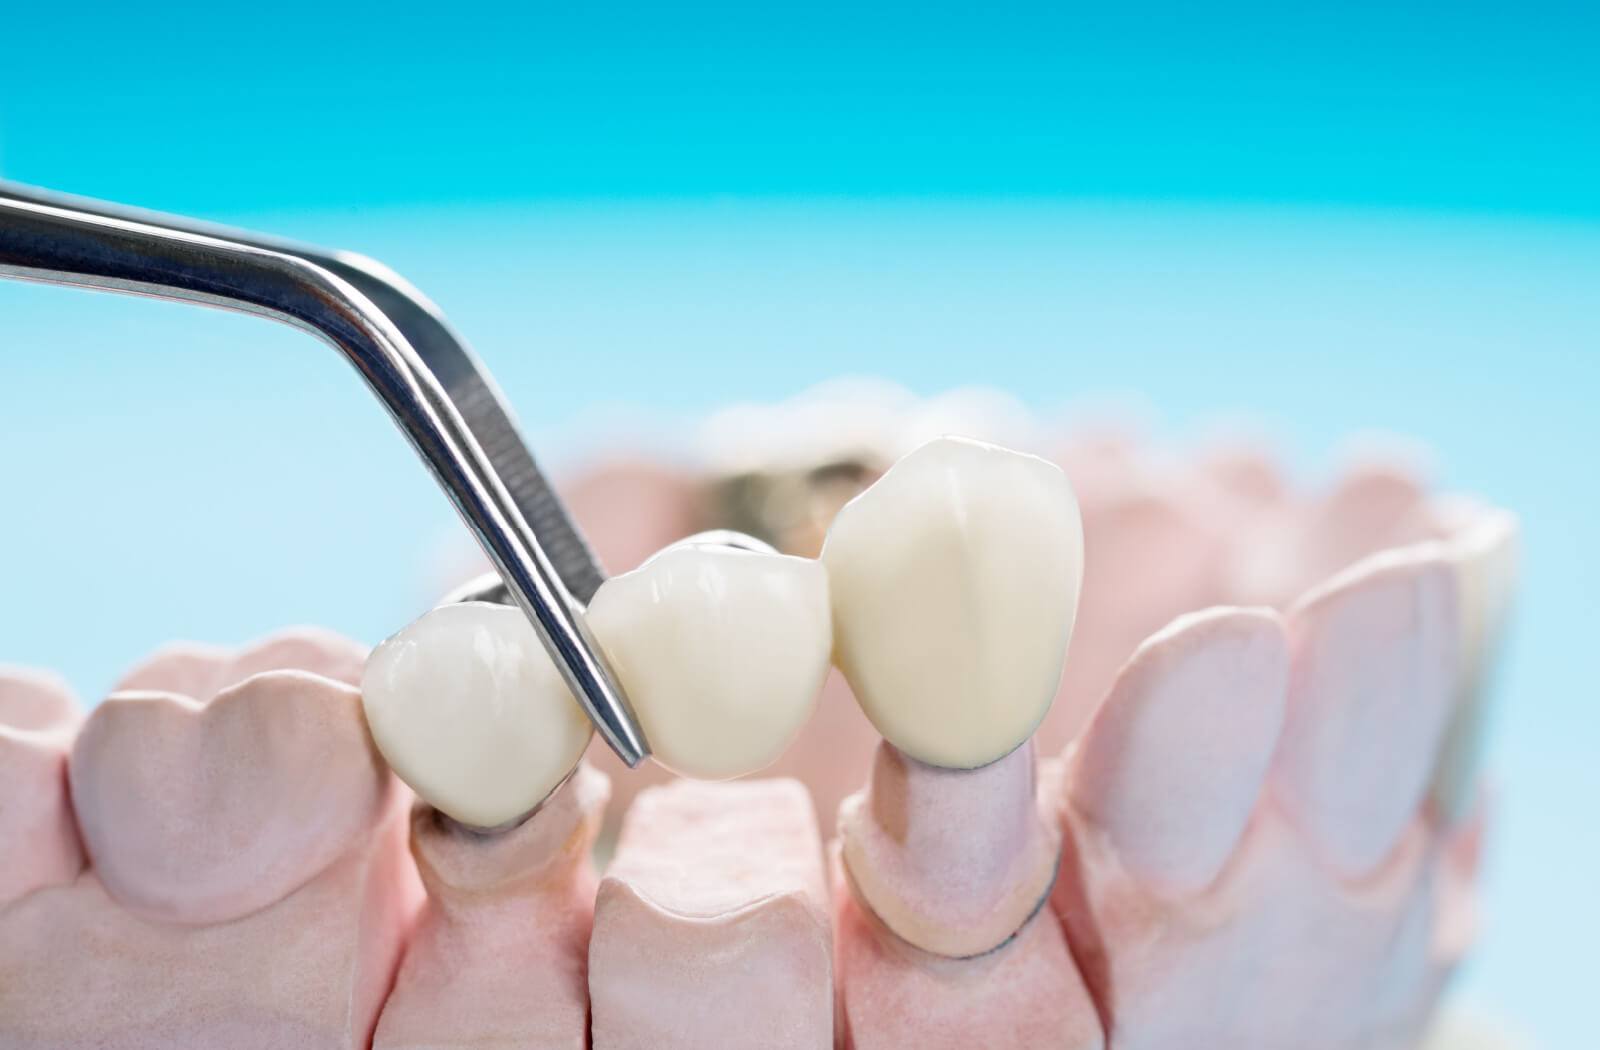 A close-up of prosthetic teeth, a crown, and a bridge used in prosthodontics.